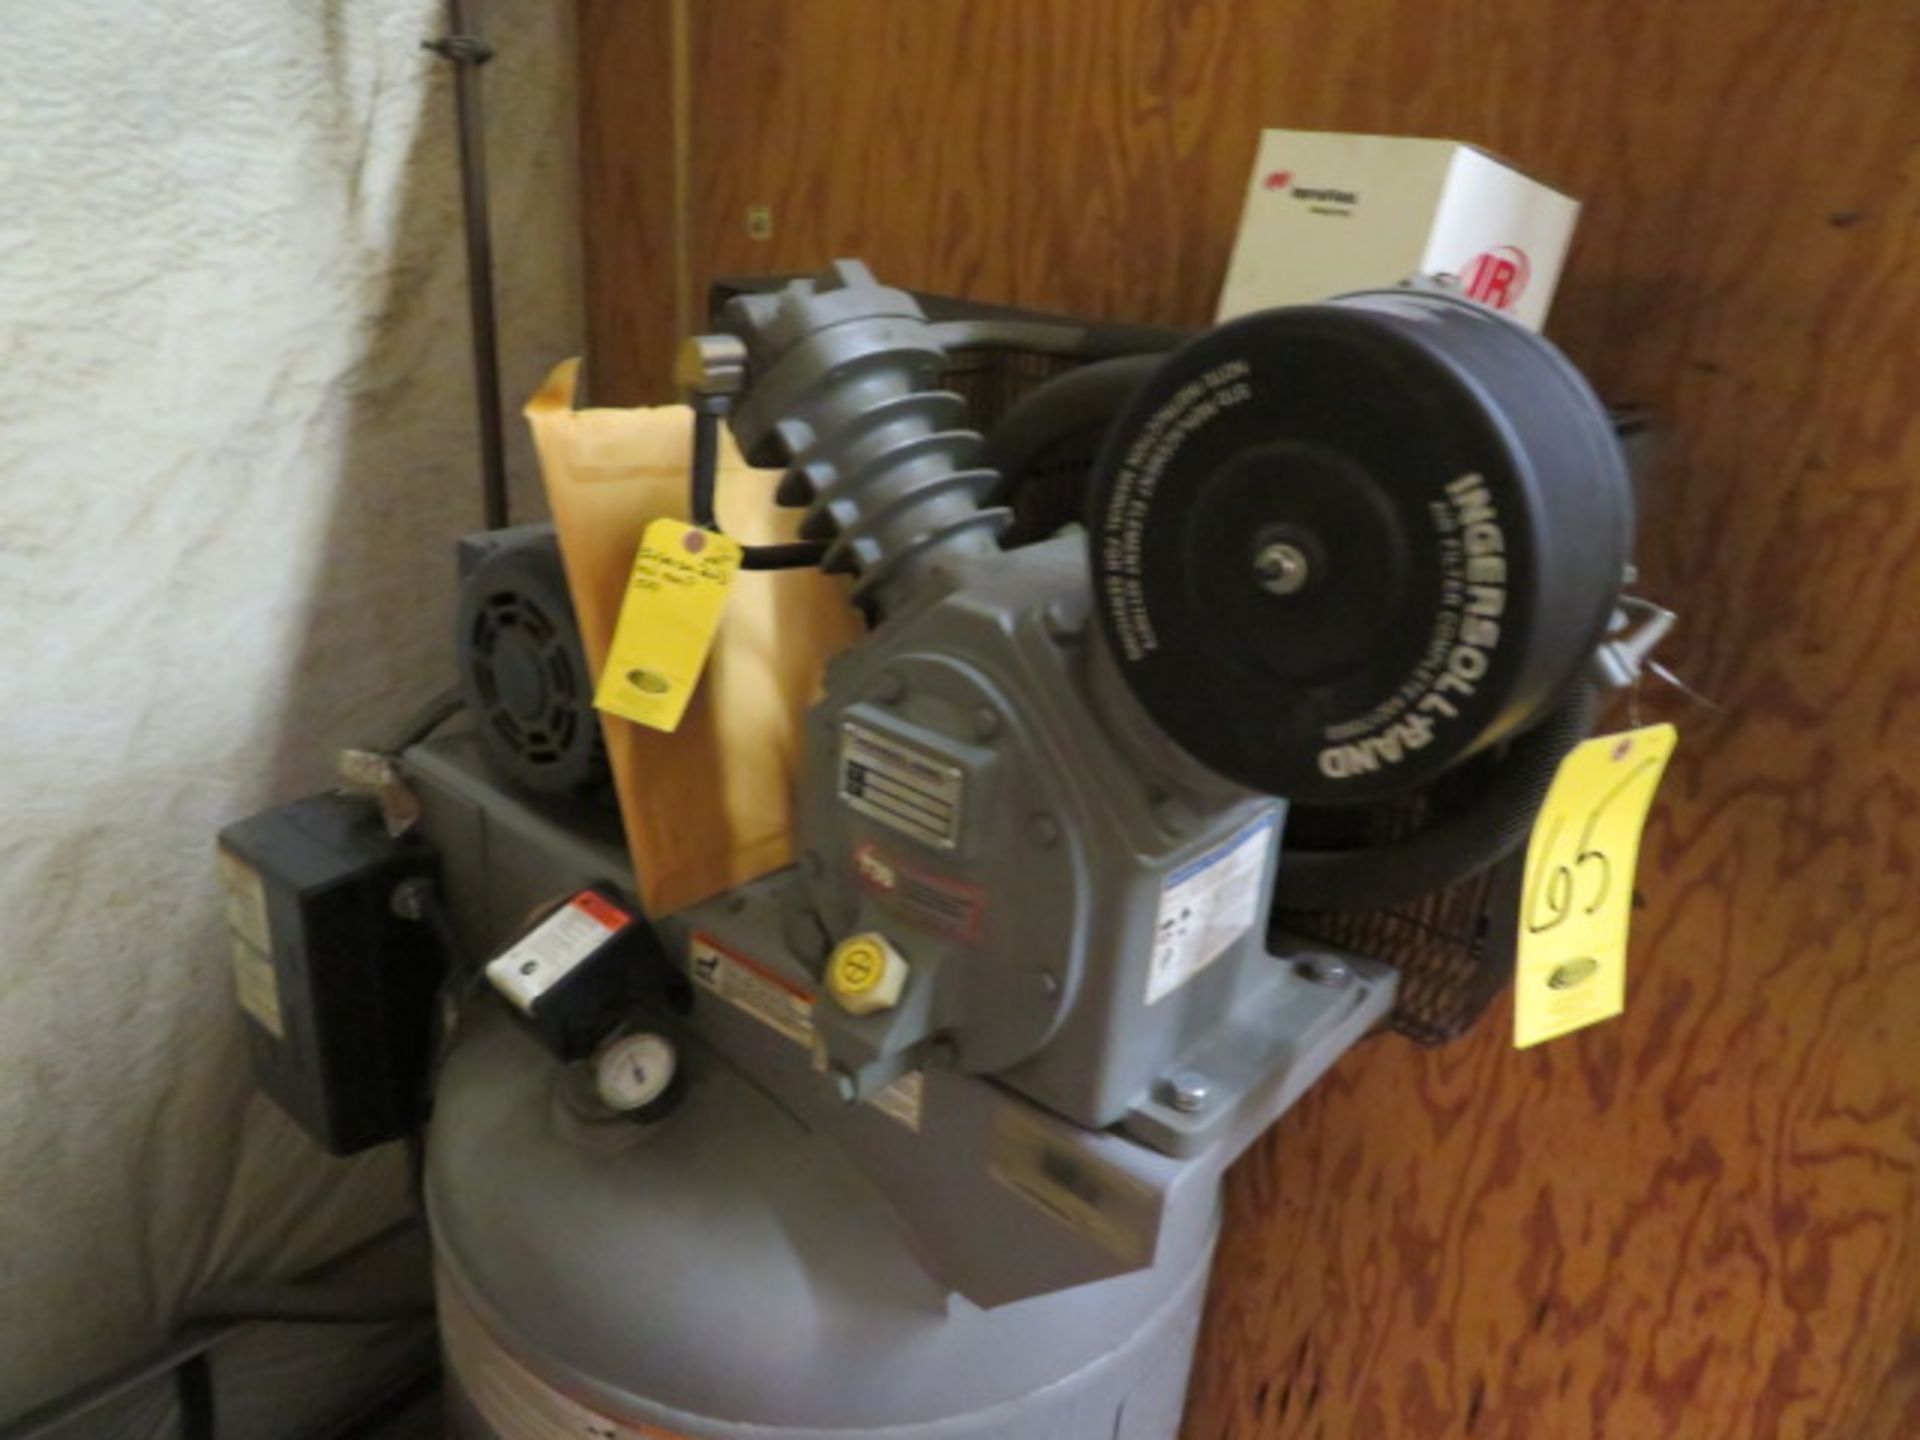 INGERSOLL-RAND 5 HP UPRIGHT AIR COMPRESSOR - Image 3 of 3